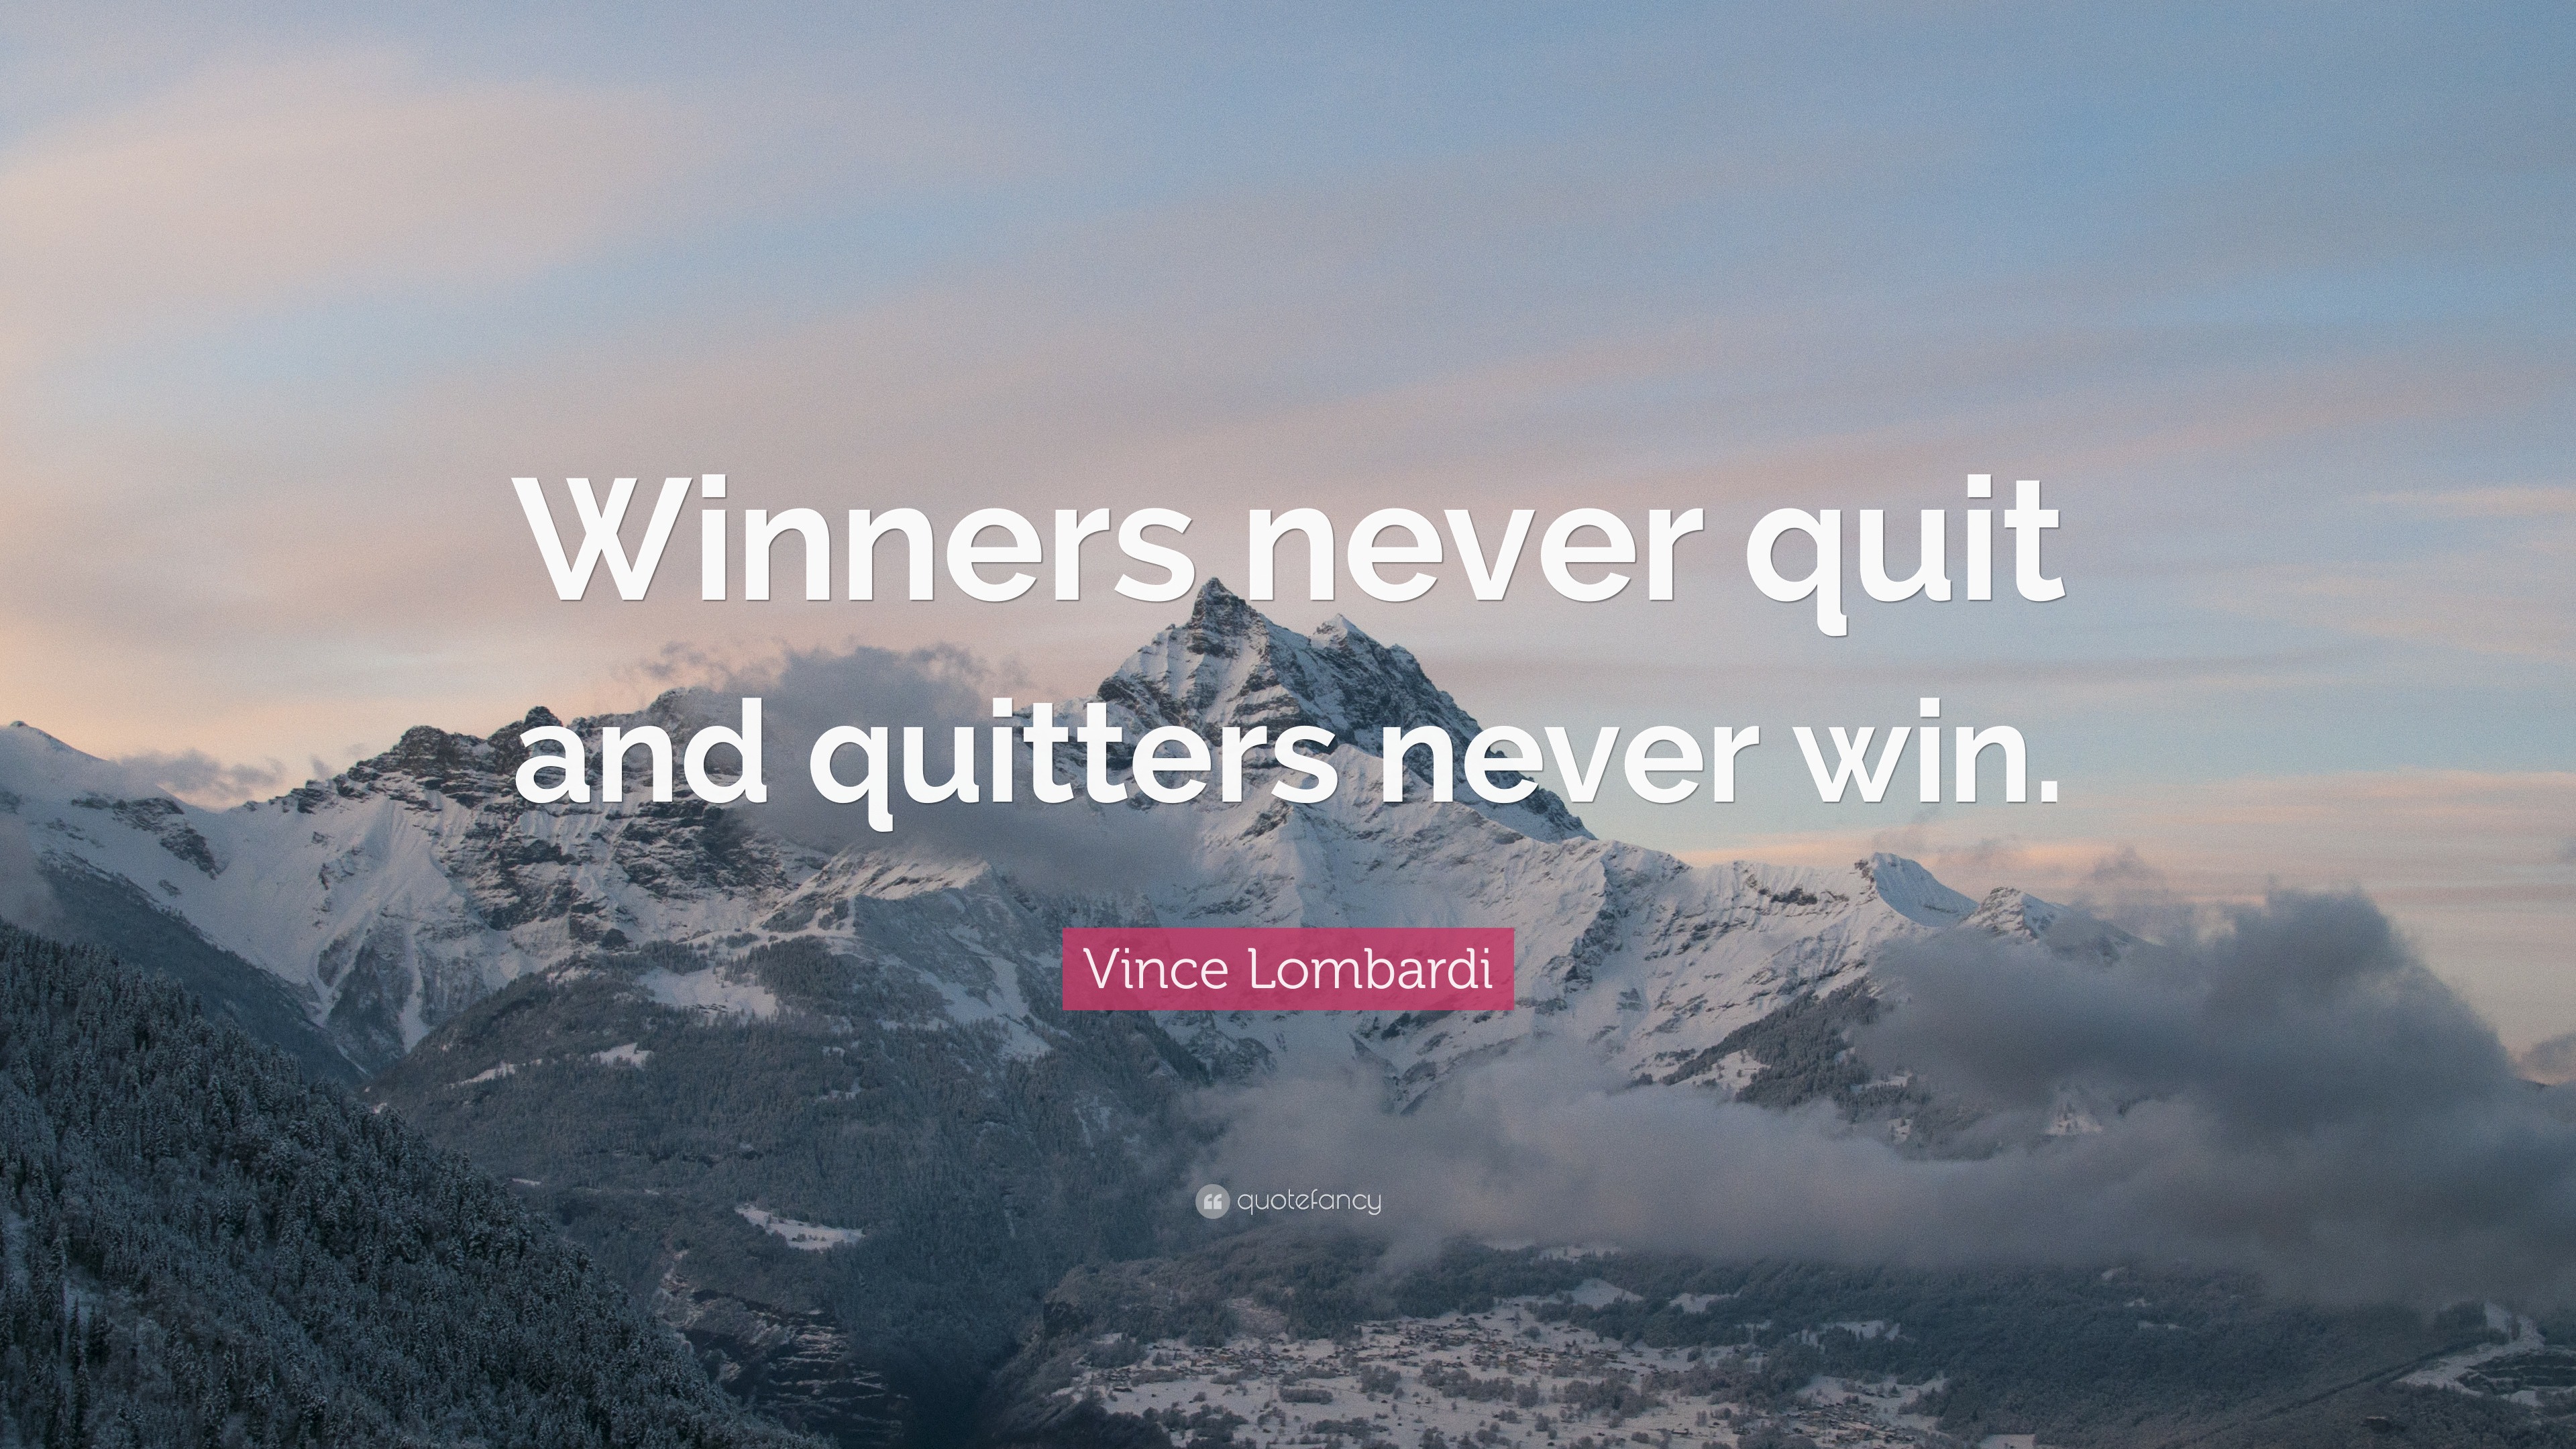 a winner never quits and a quitter never wins